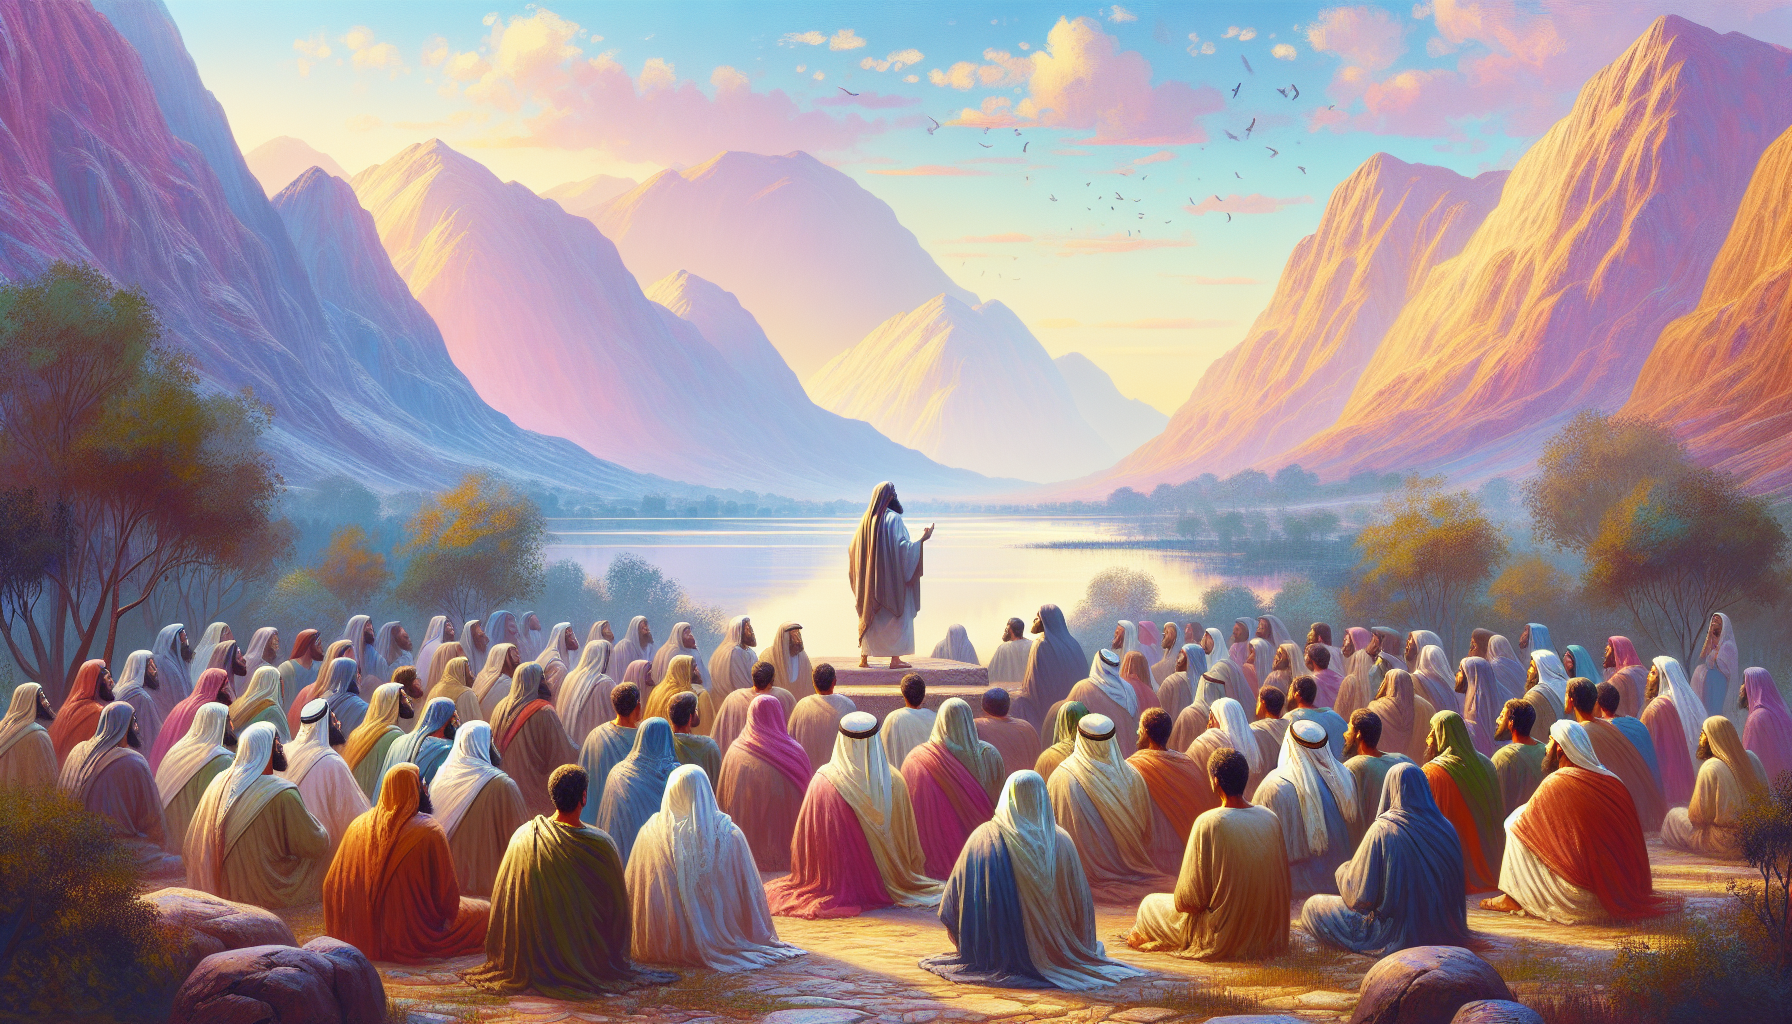 Visual representation of a serene landscape depicting Mount Sinai, with a group of ancient Israelites listening attentively as Moses delivers a sermon based on Deuteronomy 8:1-3. The scene is bathed i